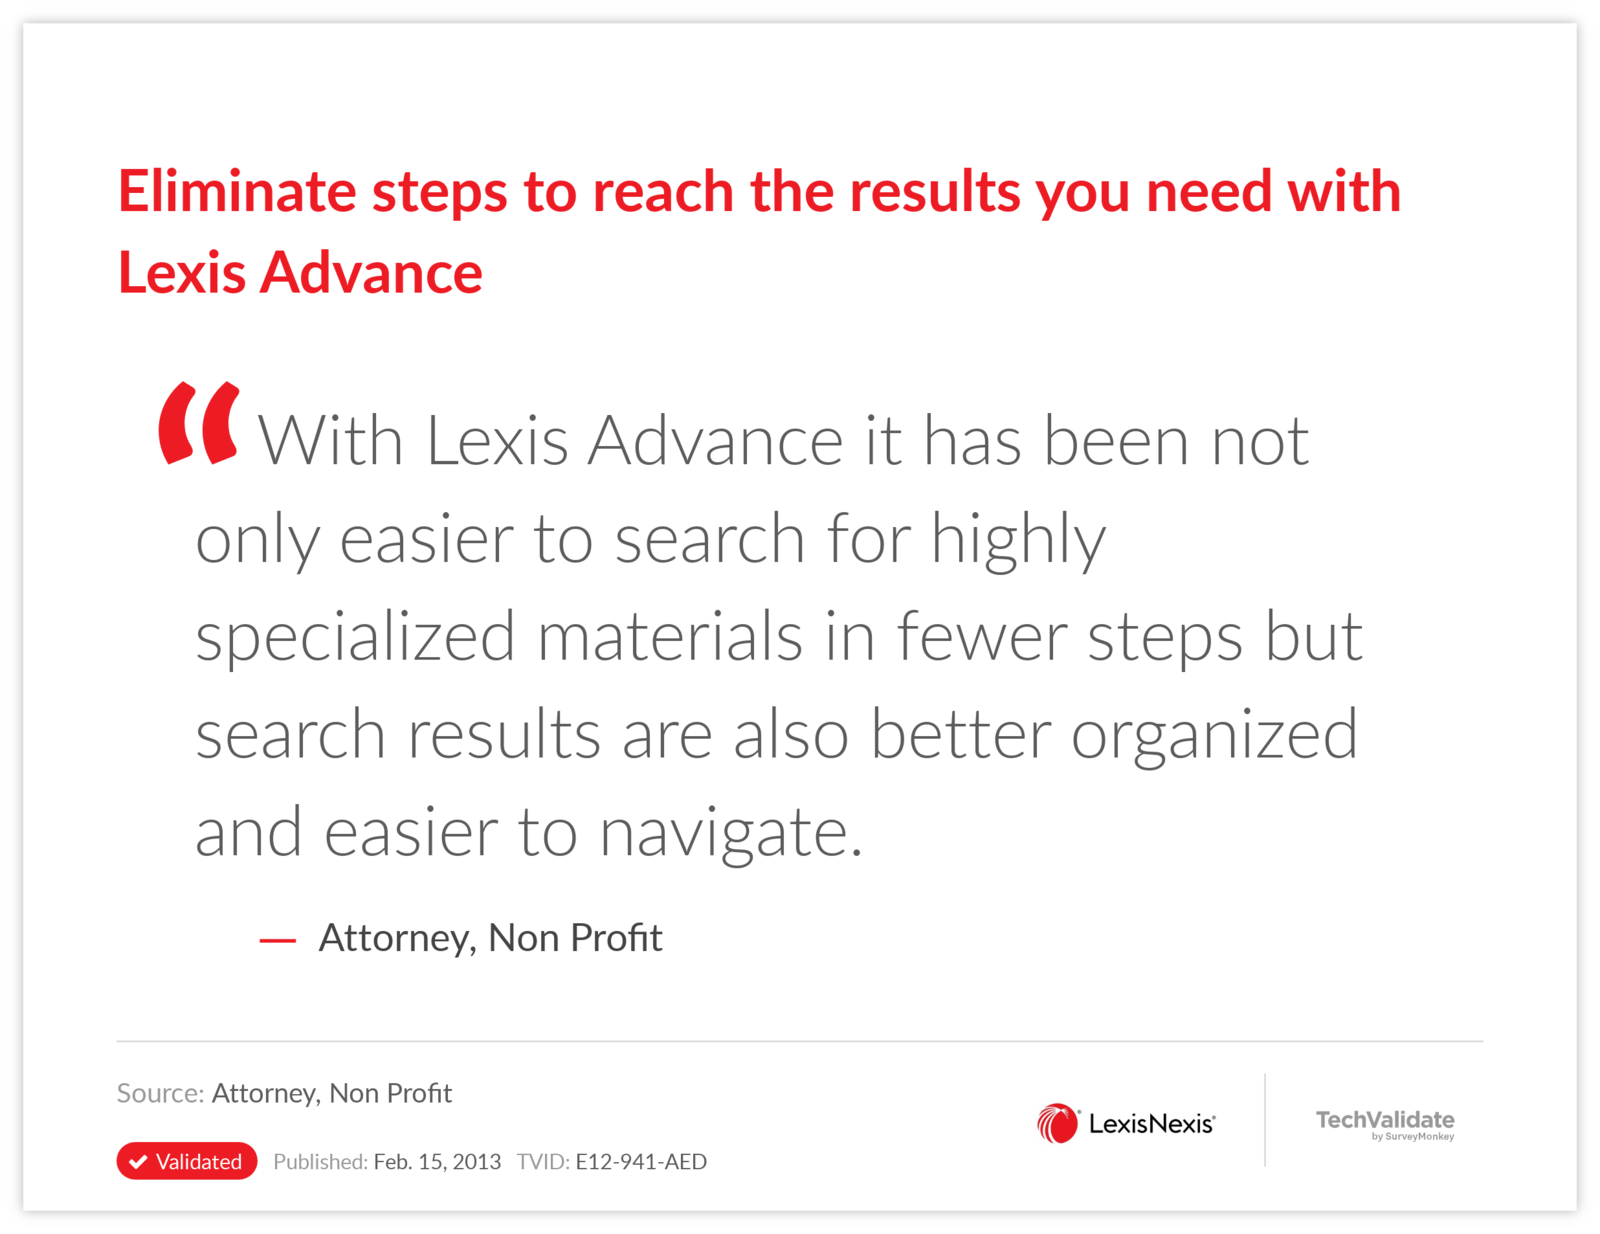 Eliminate steps to reach the results you need with Lexis Advance